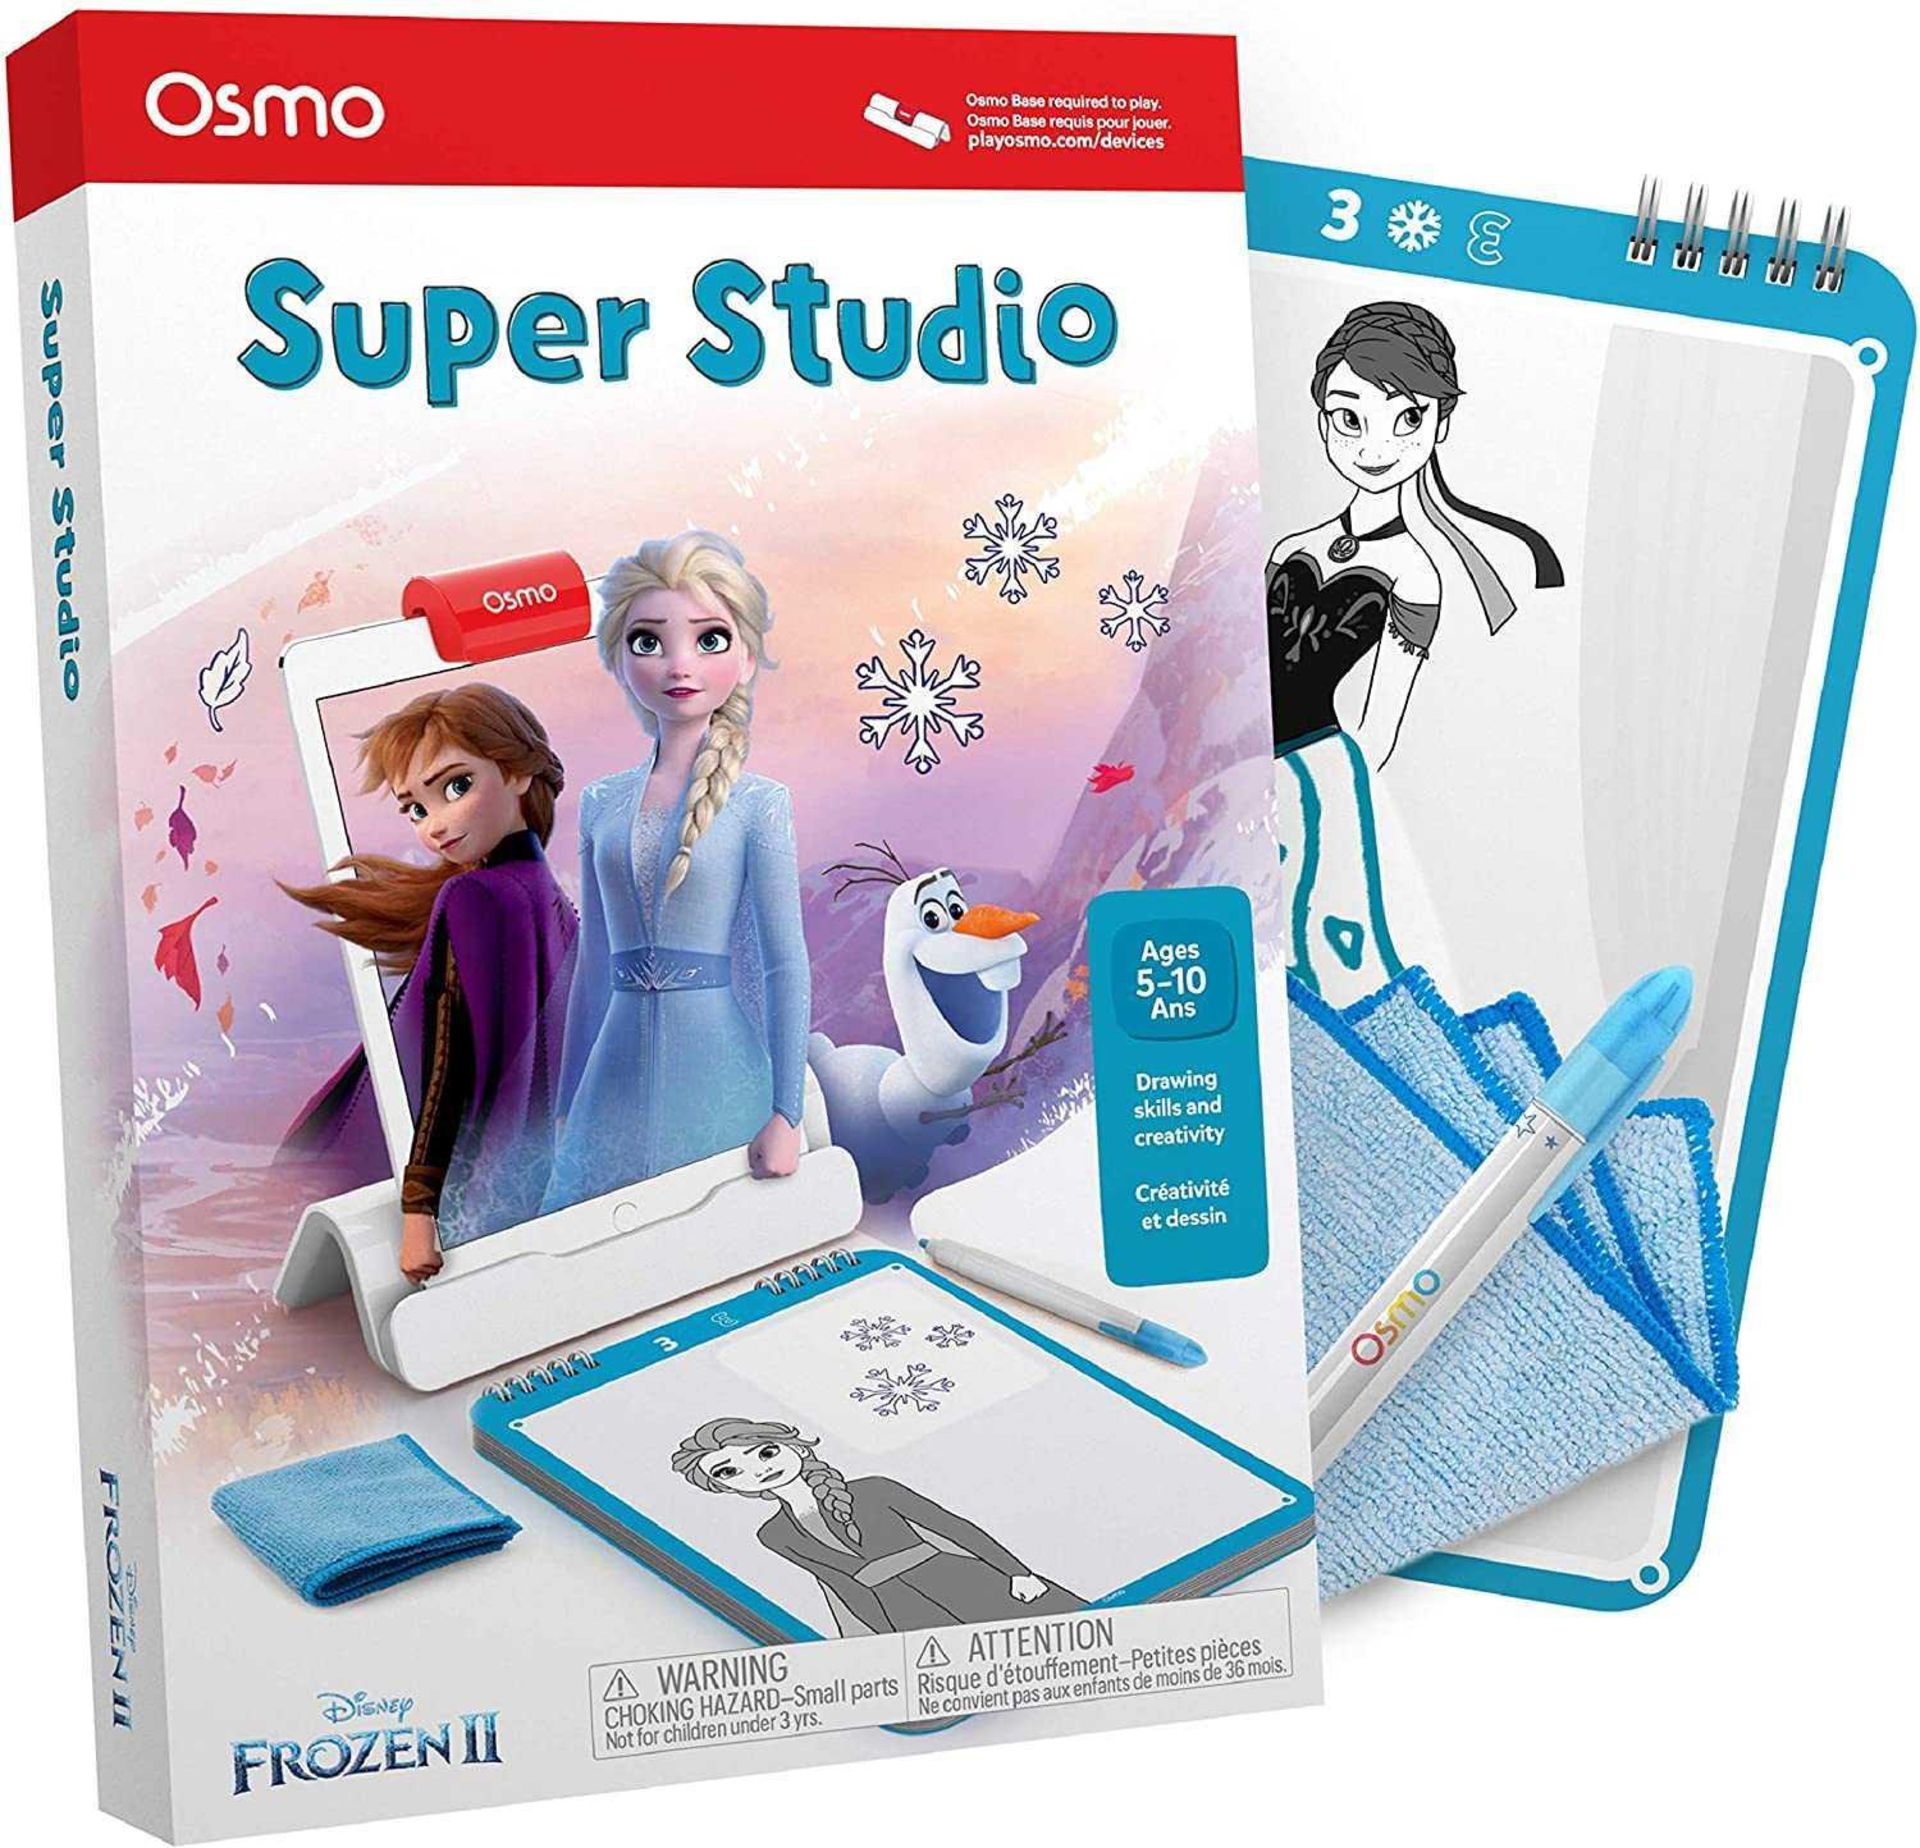 Rrp £120 Boxed Osmo Educational Set To Include A Little Genius Starter Kit And A Disney Frozen 2 Sup - Image 2 of 2